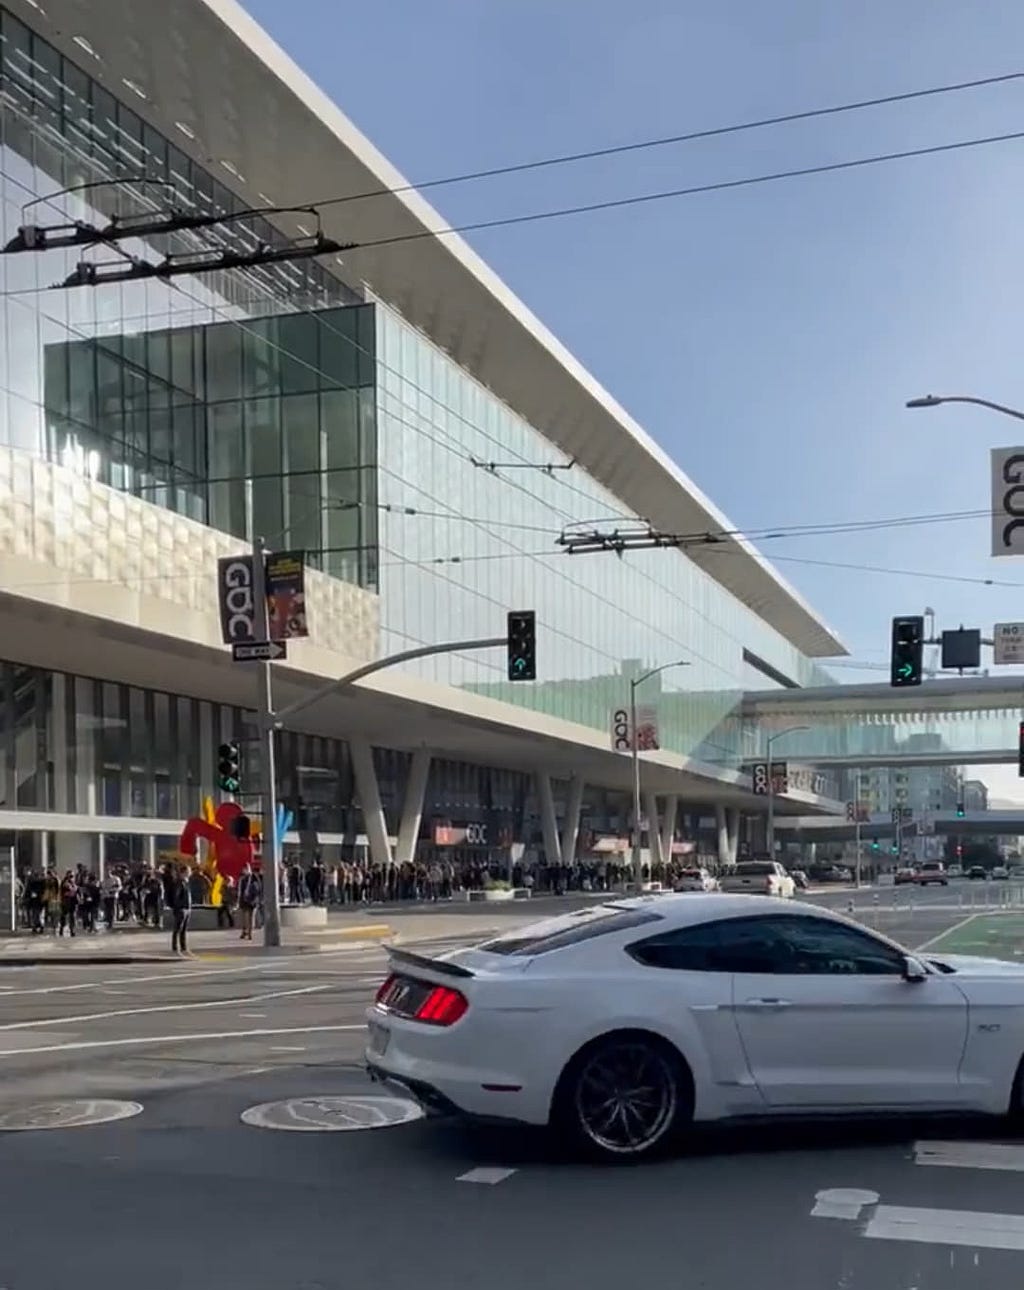 An image of the outside of the Moscone Convention Center during GDC. The line of people waiting to pick up badges wrapped around the block.